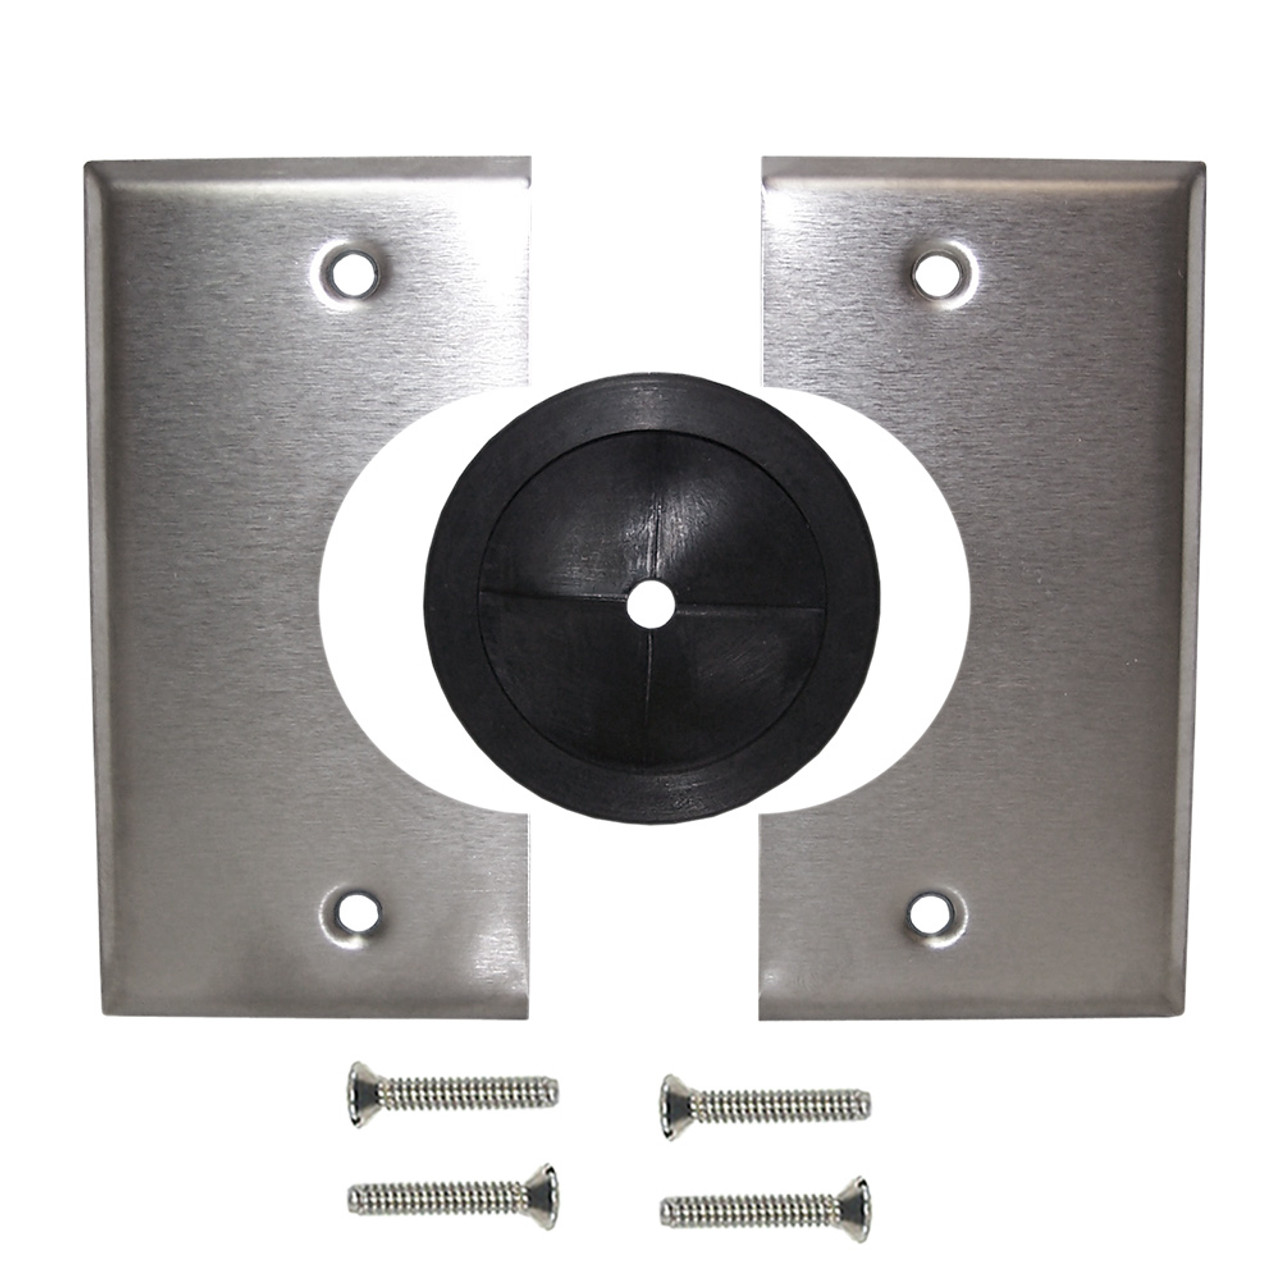 Cable Pass through Wall Plate Double Gang Stainless Steel Split1